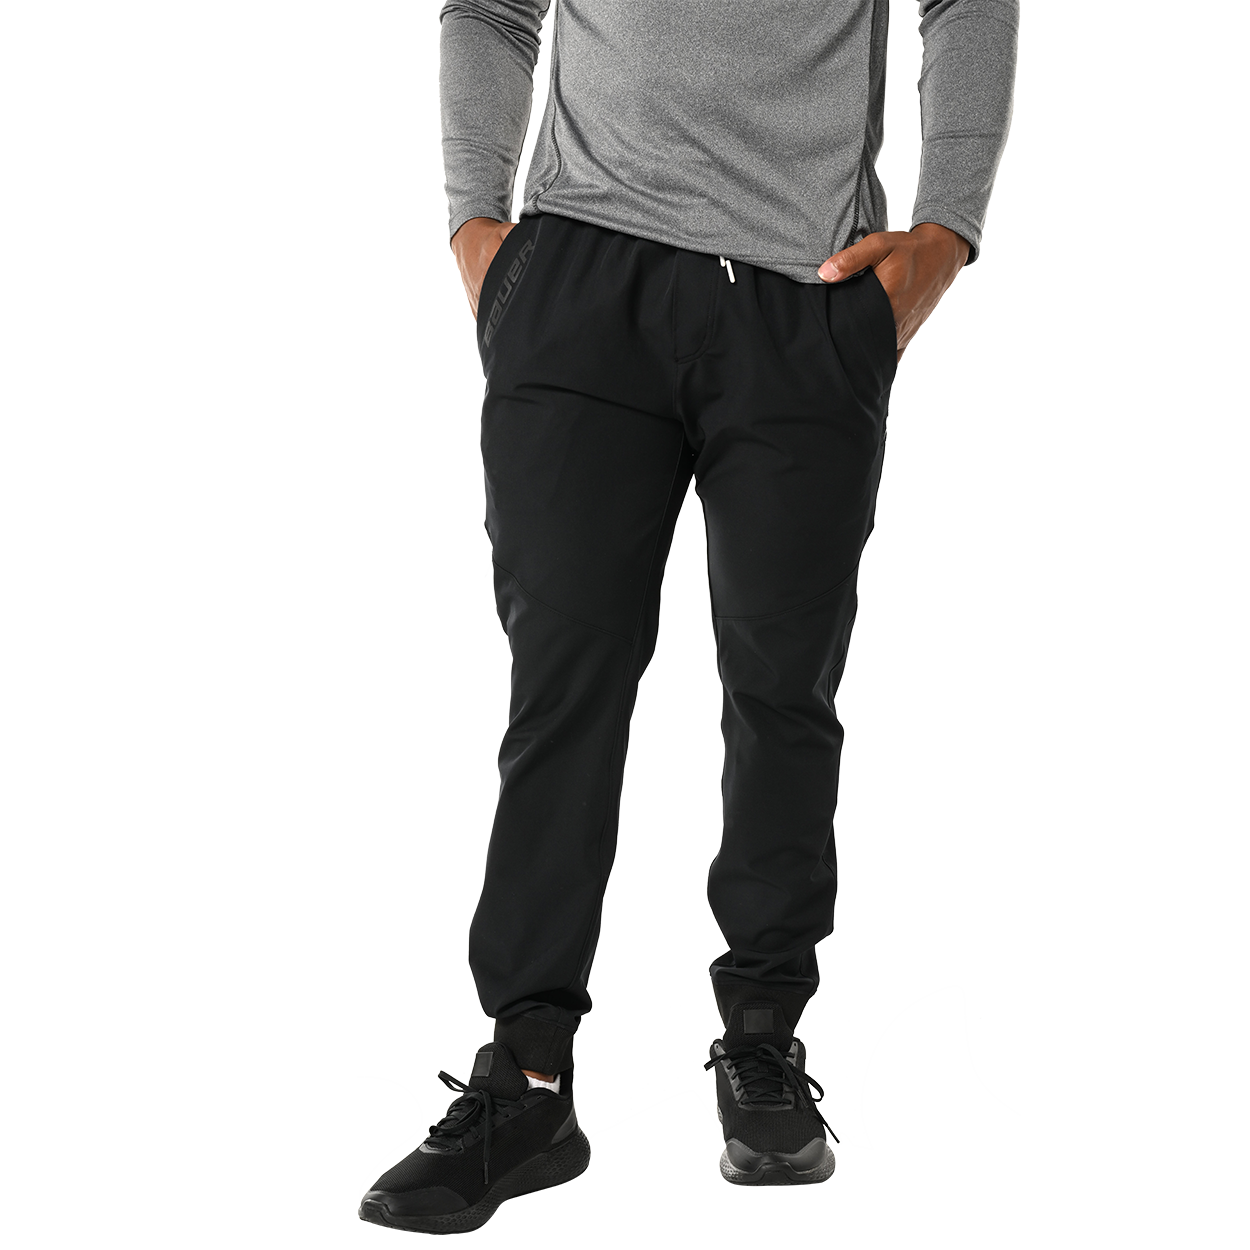 11 Best Men's Trackpants To Buy This Winter  Checkout – Best Deals, Expert  Product Reviews & Buying Guides